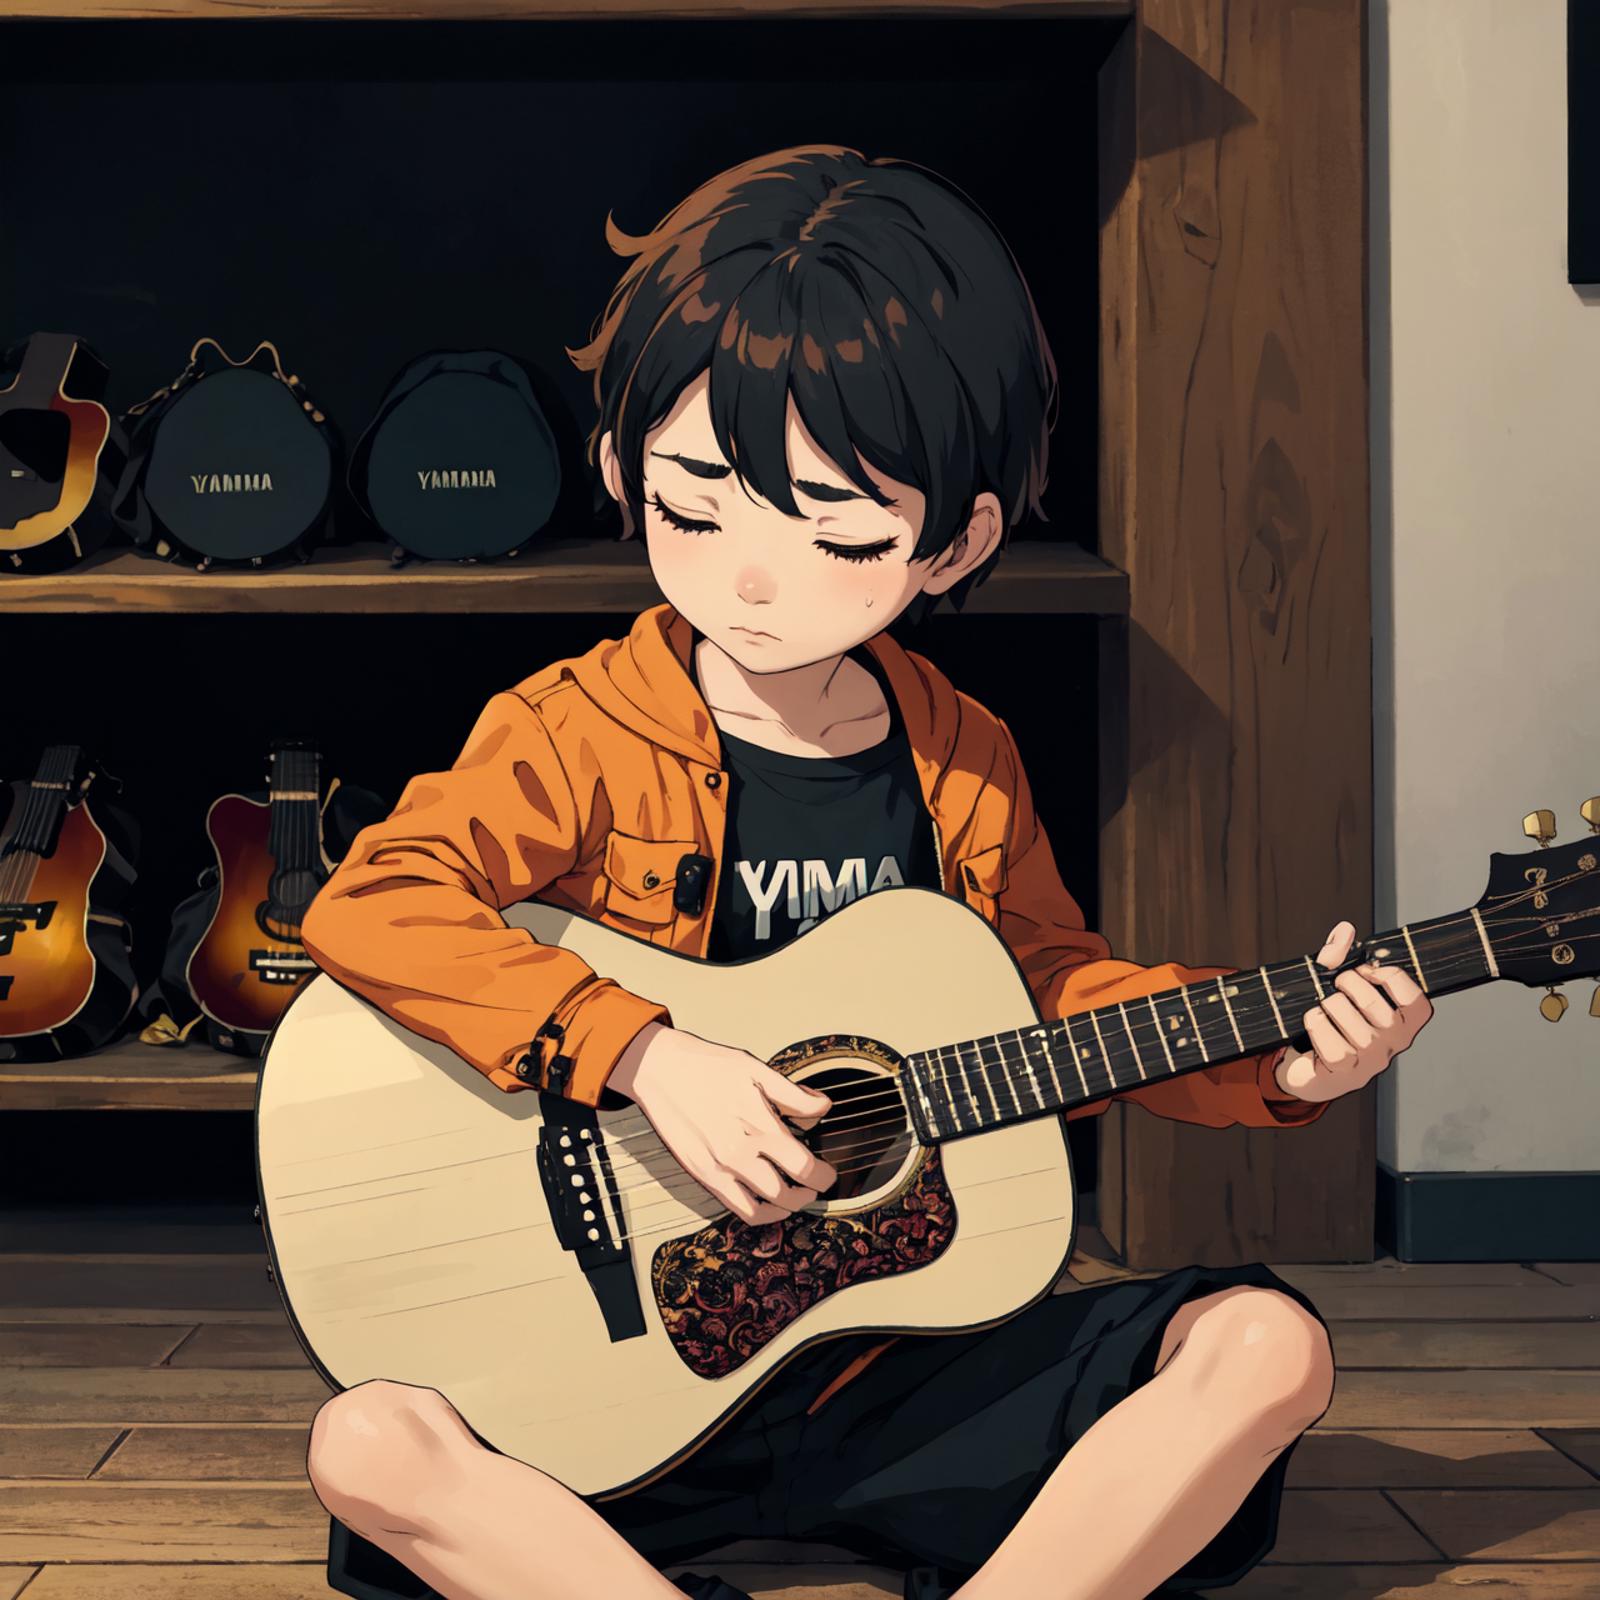 A young boy playing guitar in a music store.